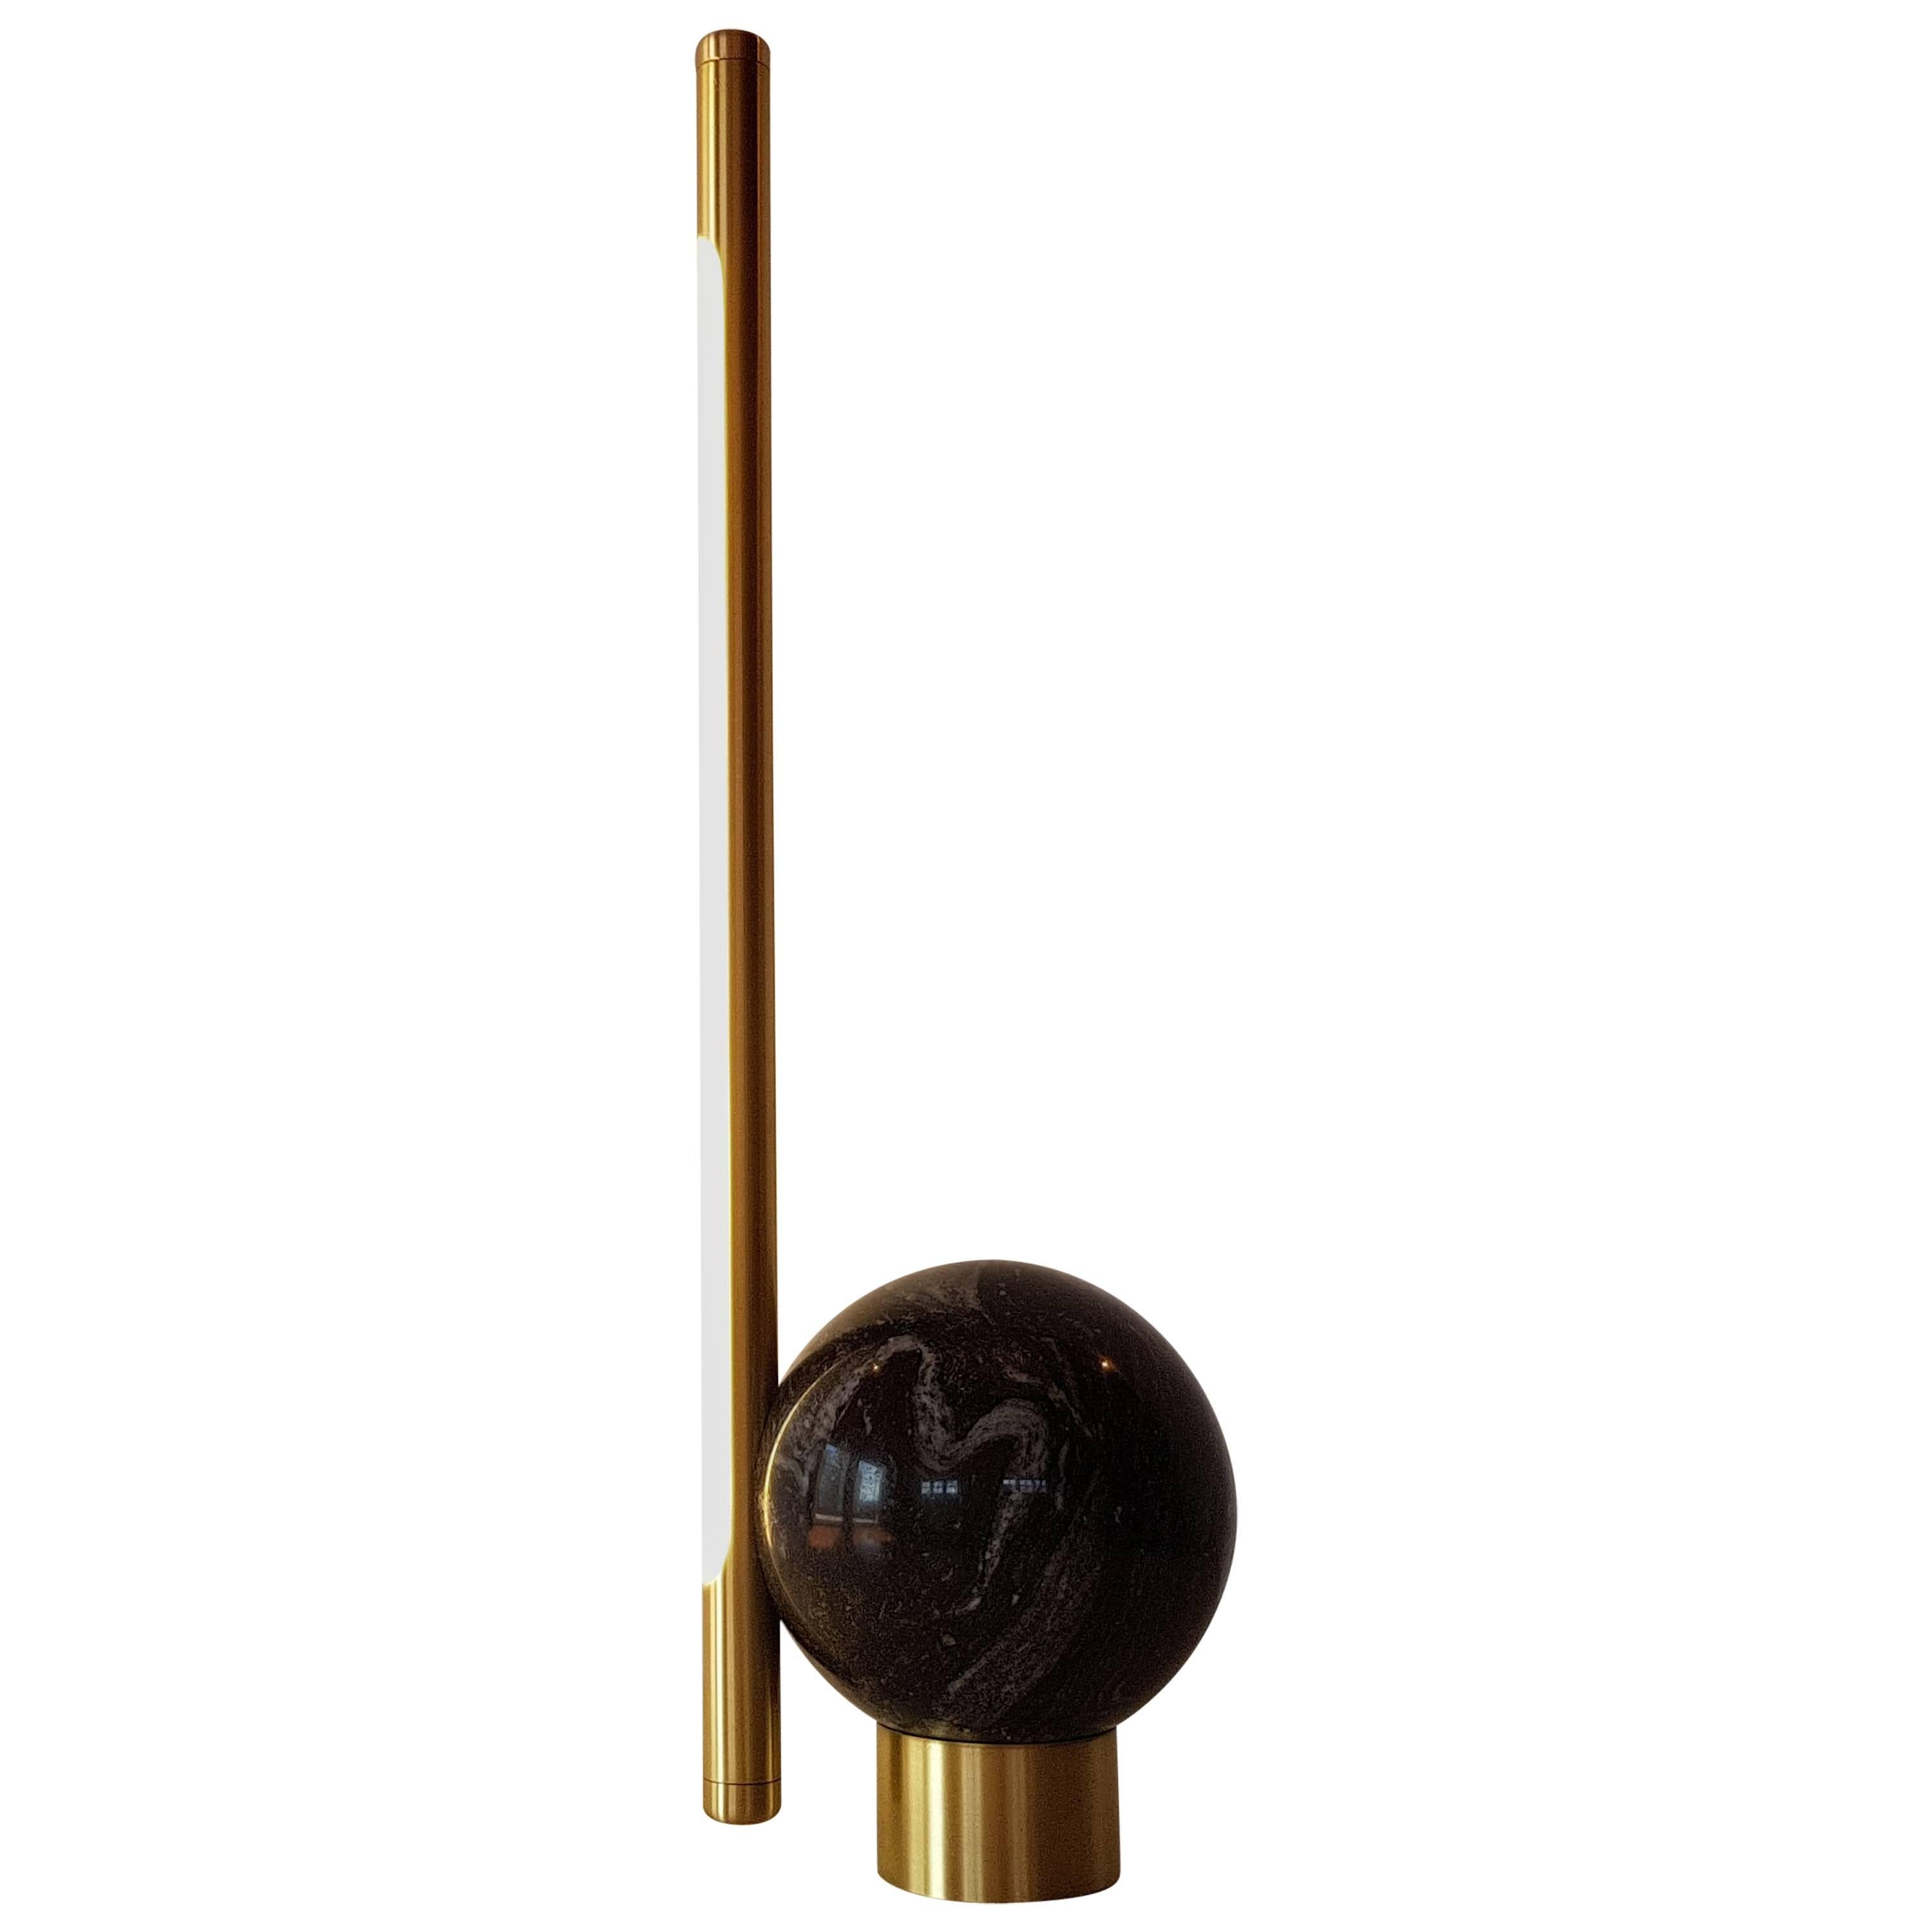 'Bubble' Table Lamp in Black Marble and Copper, Brazilian Contemporary Style For Sale